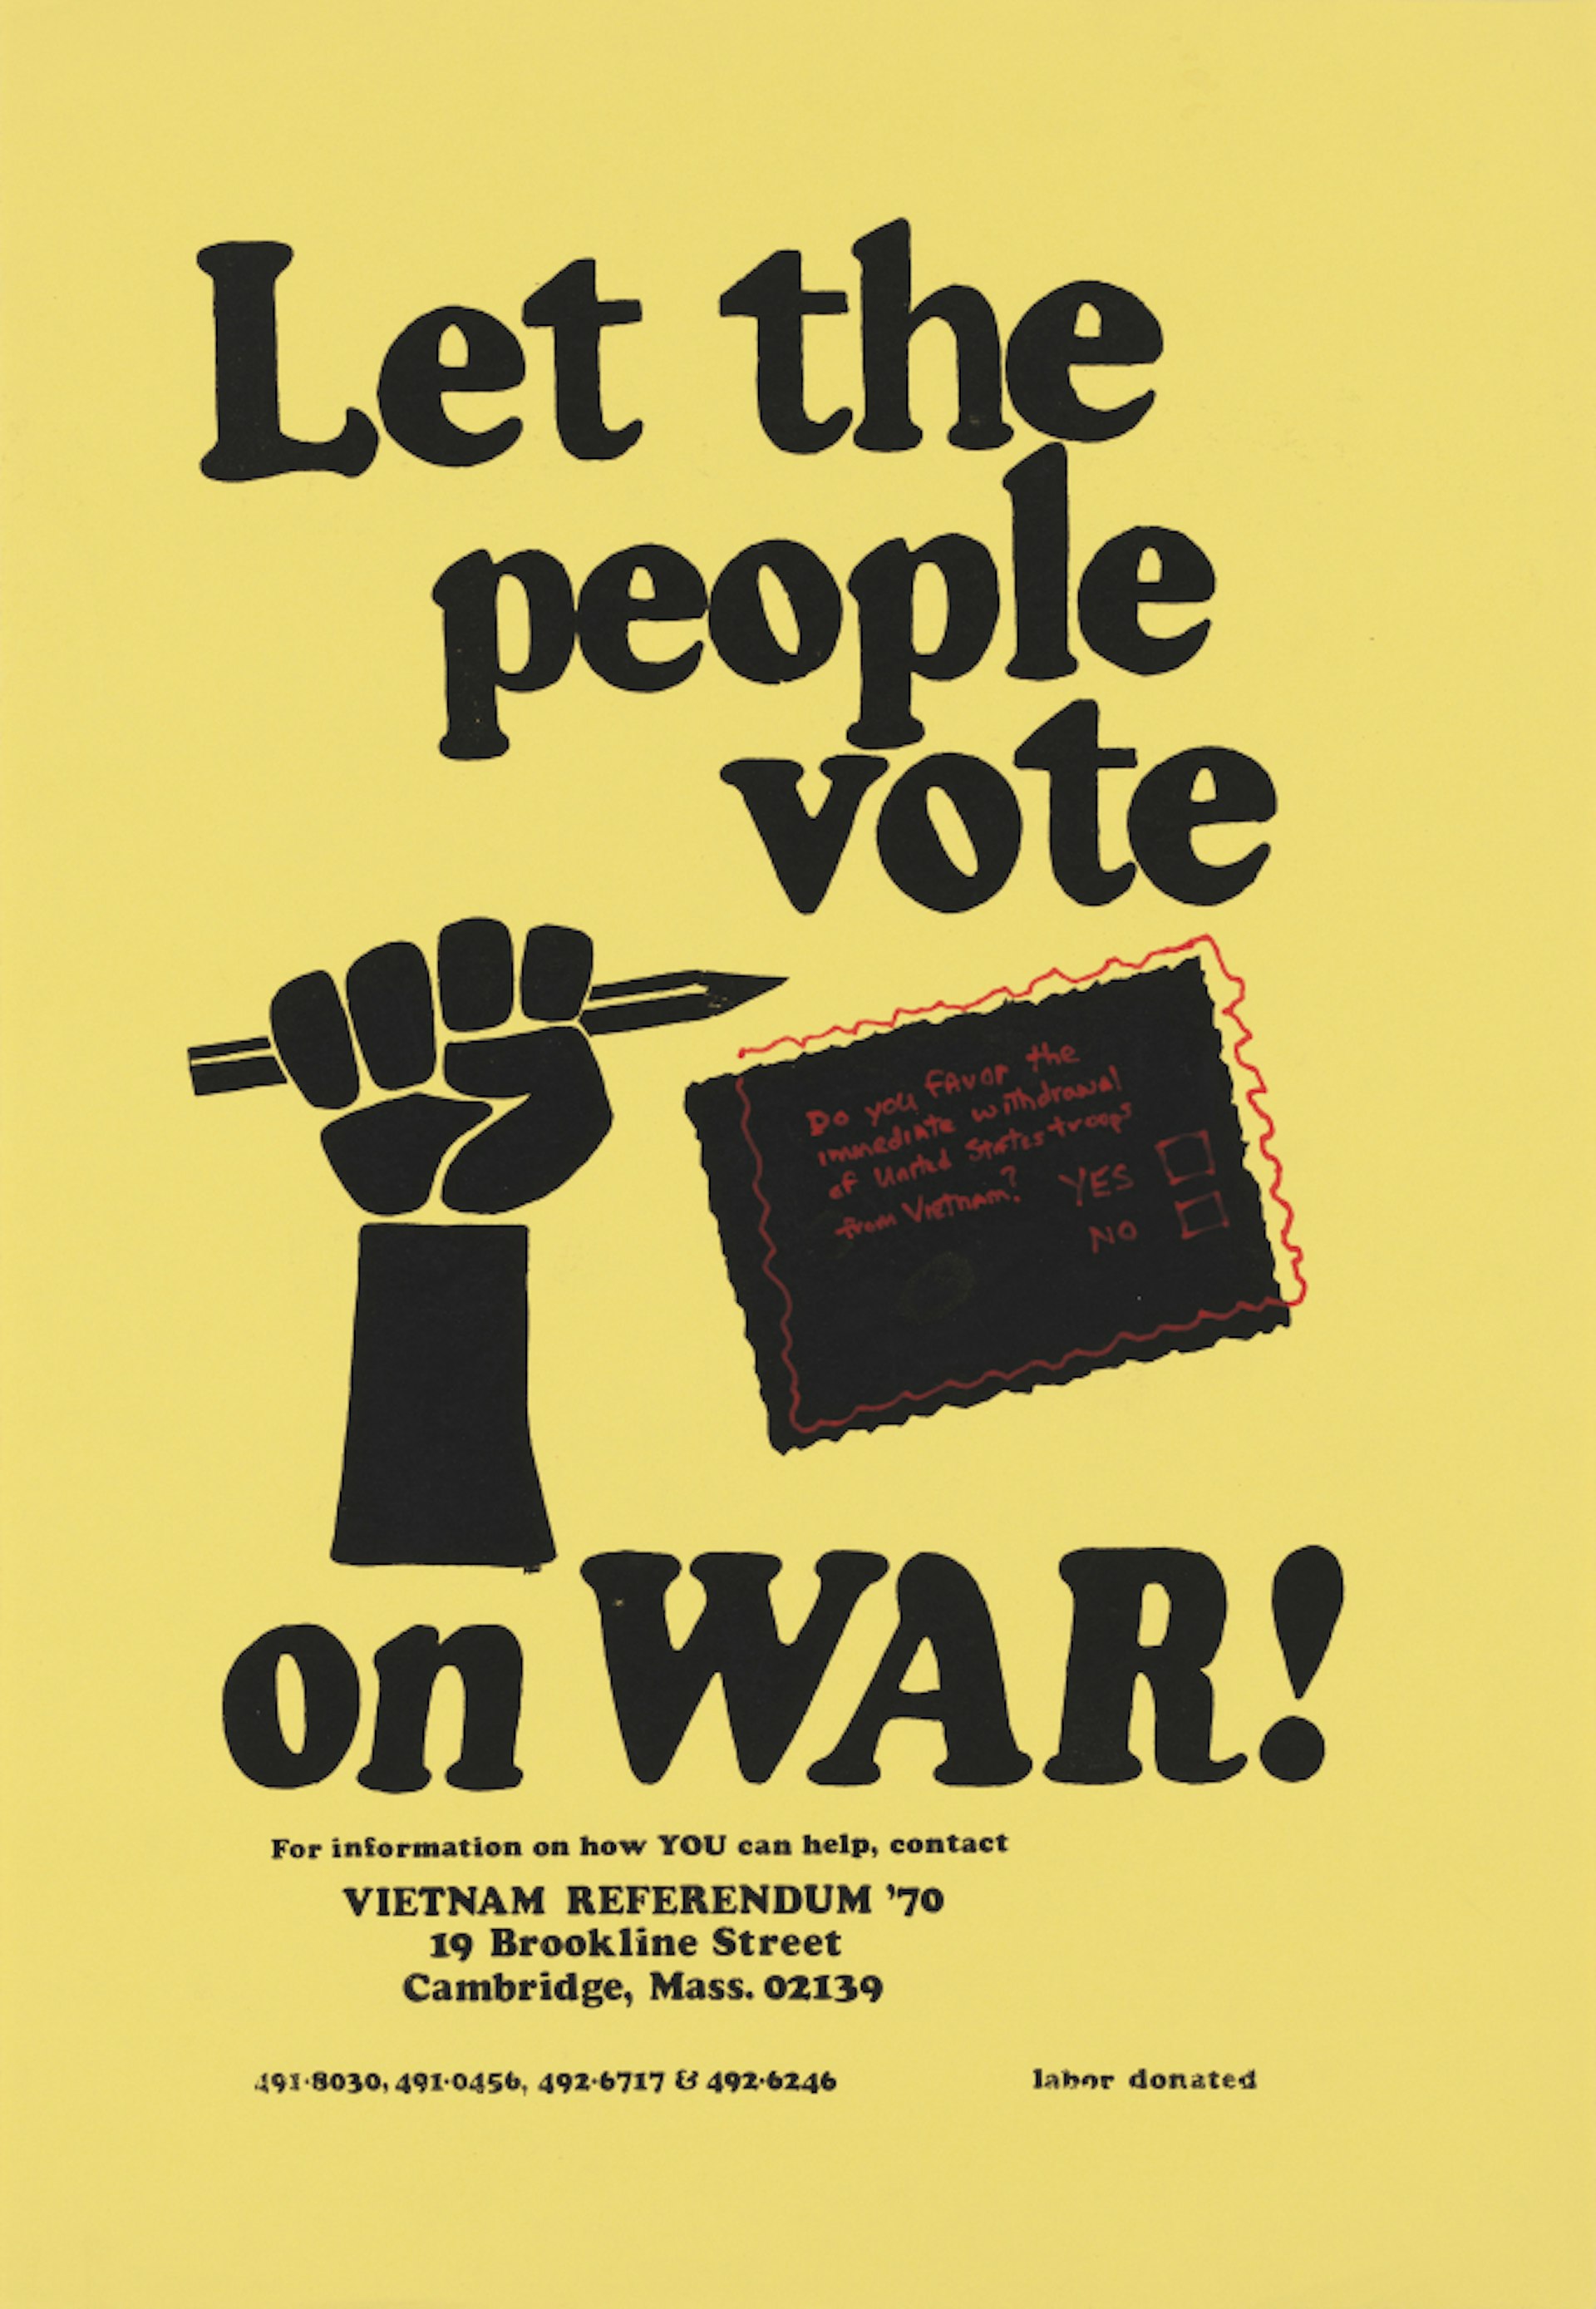 Vietnam Referendum ’70, Let the People Vote on War!, 1970. Courtesy the Whitney.